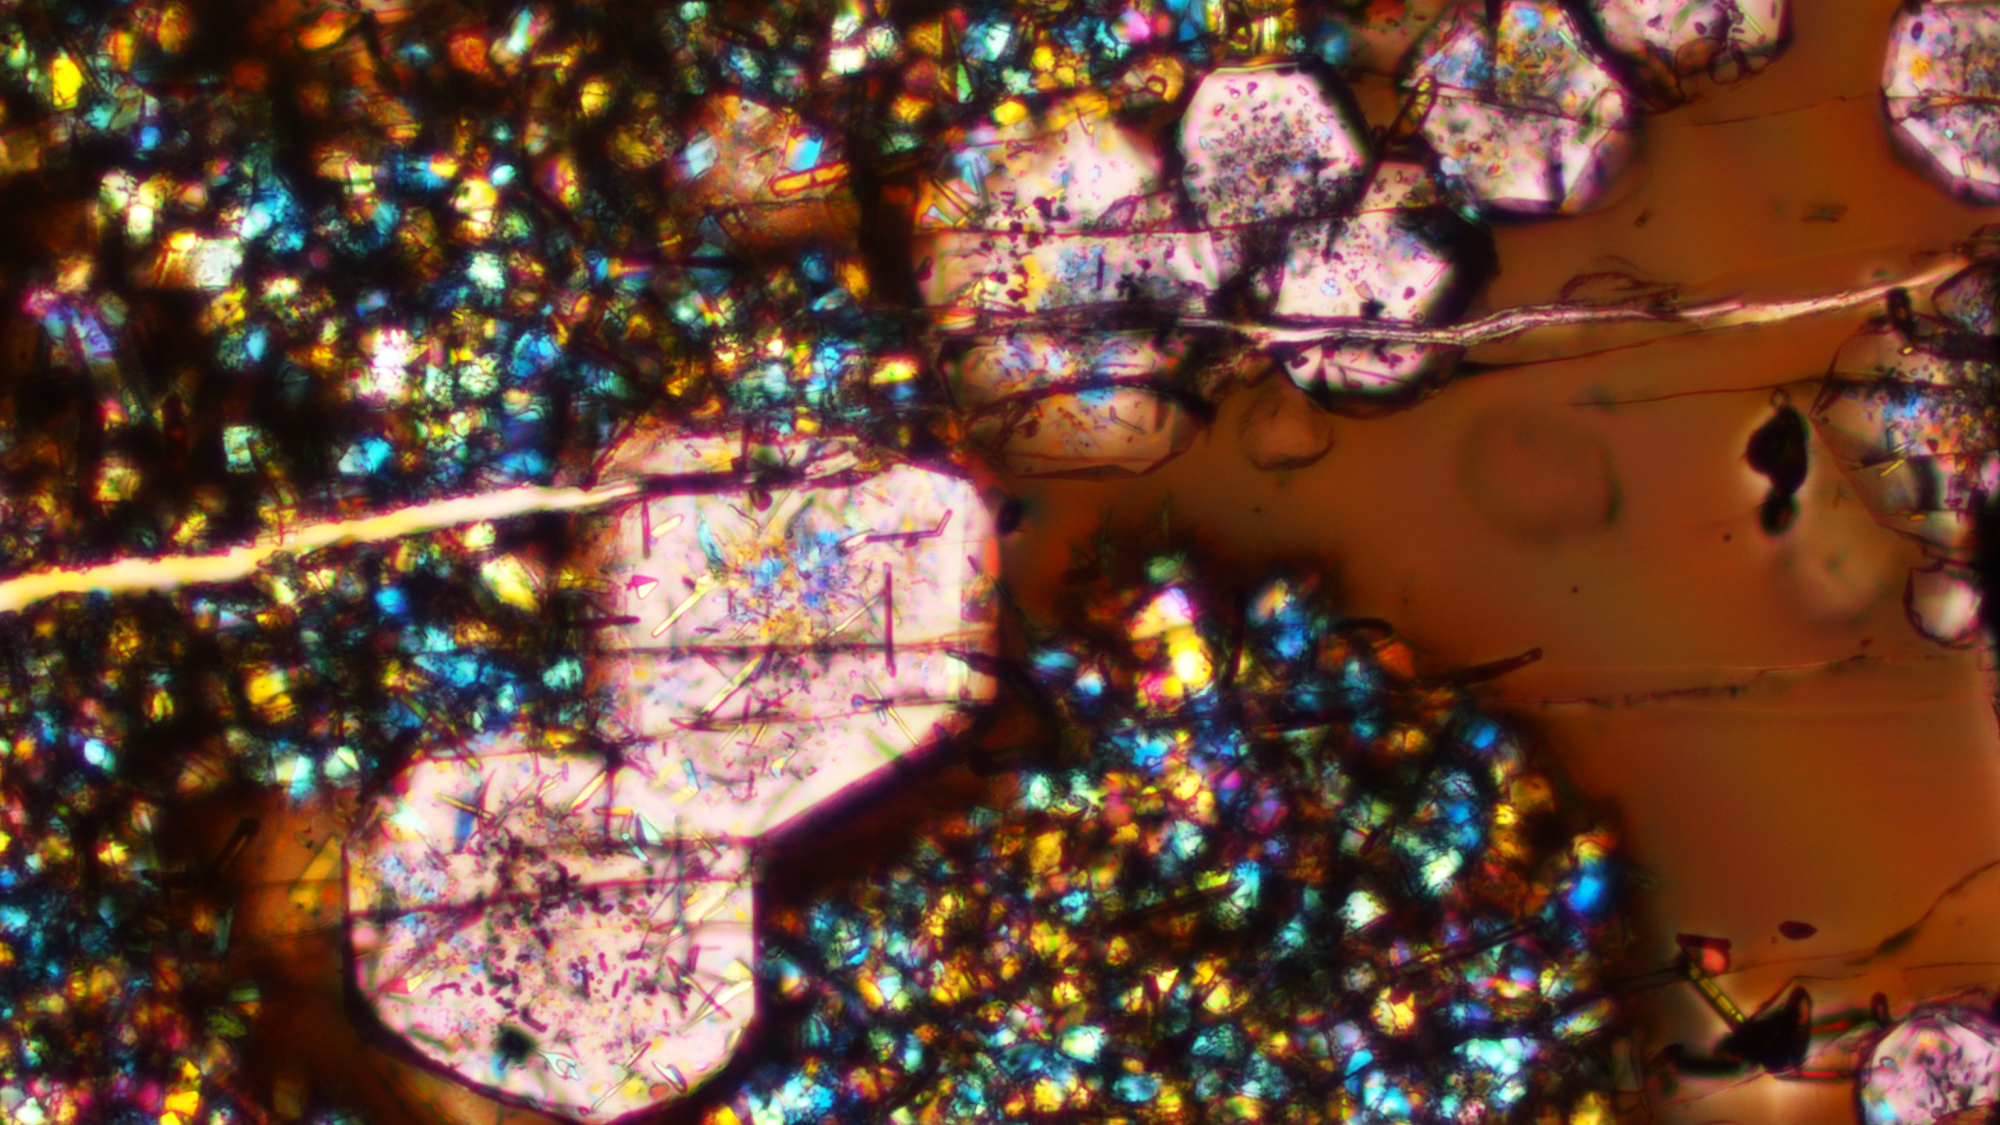 A microscope image from an experiment conducted for a study on continental crust. The image contains glass (brown), large garnets (pink), and other small mineral crystals. The field of view is 410 microns wide, about size of a sugar crystal